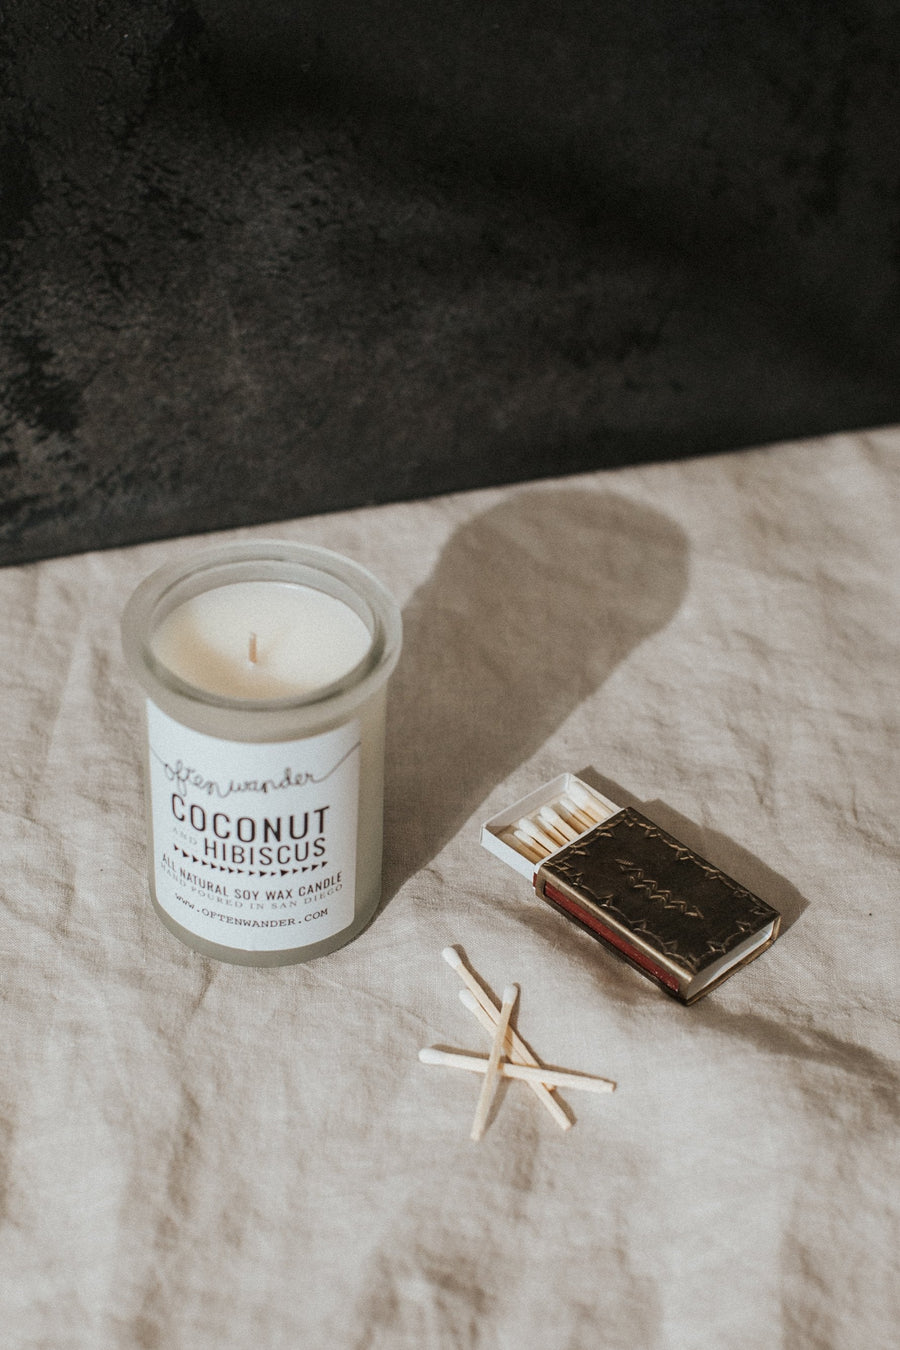 Often Wander Objects 6 oz / Coconut & Hibiscus / FINAL SALE Coconut & Hibiscus Apothecary Candle